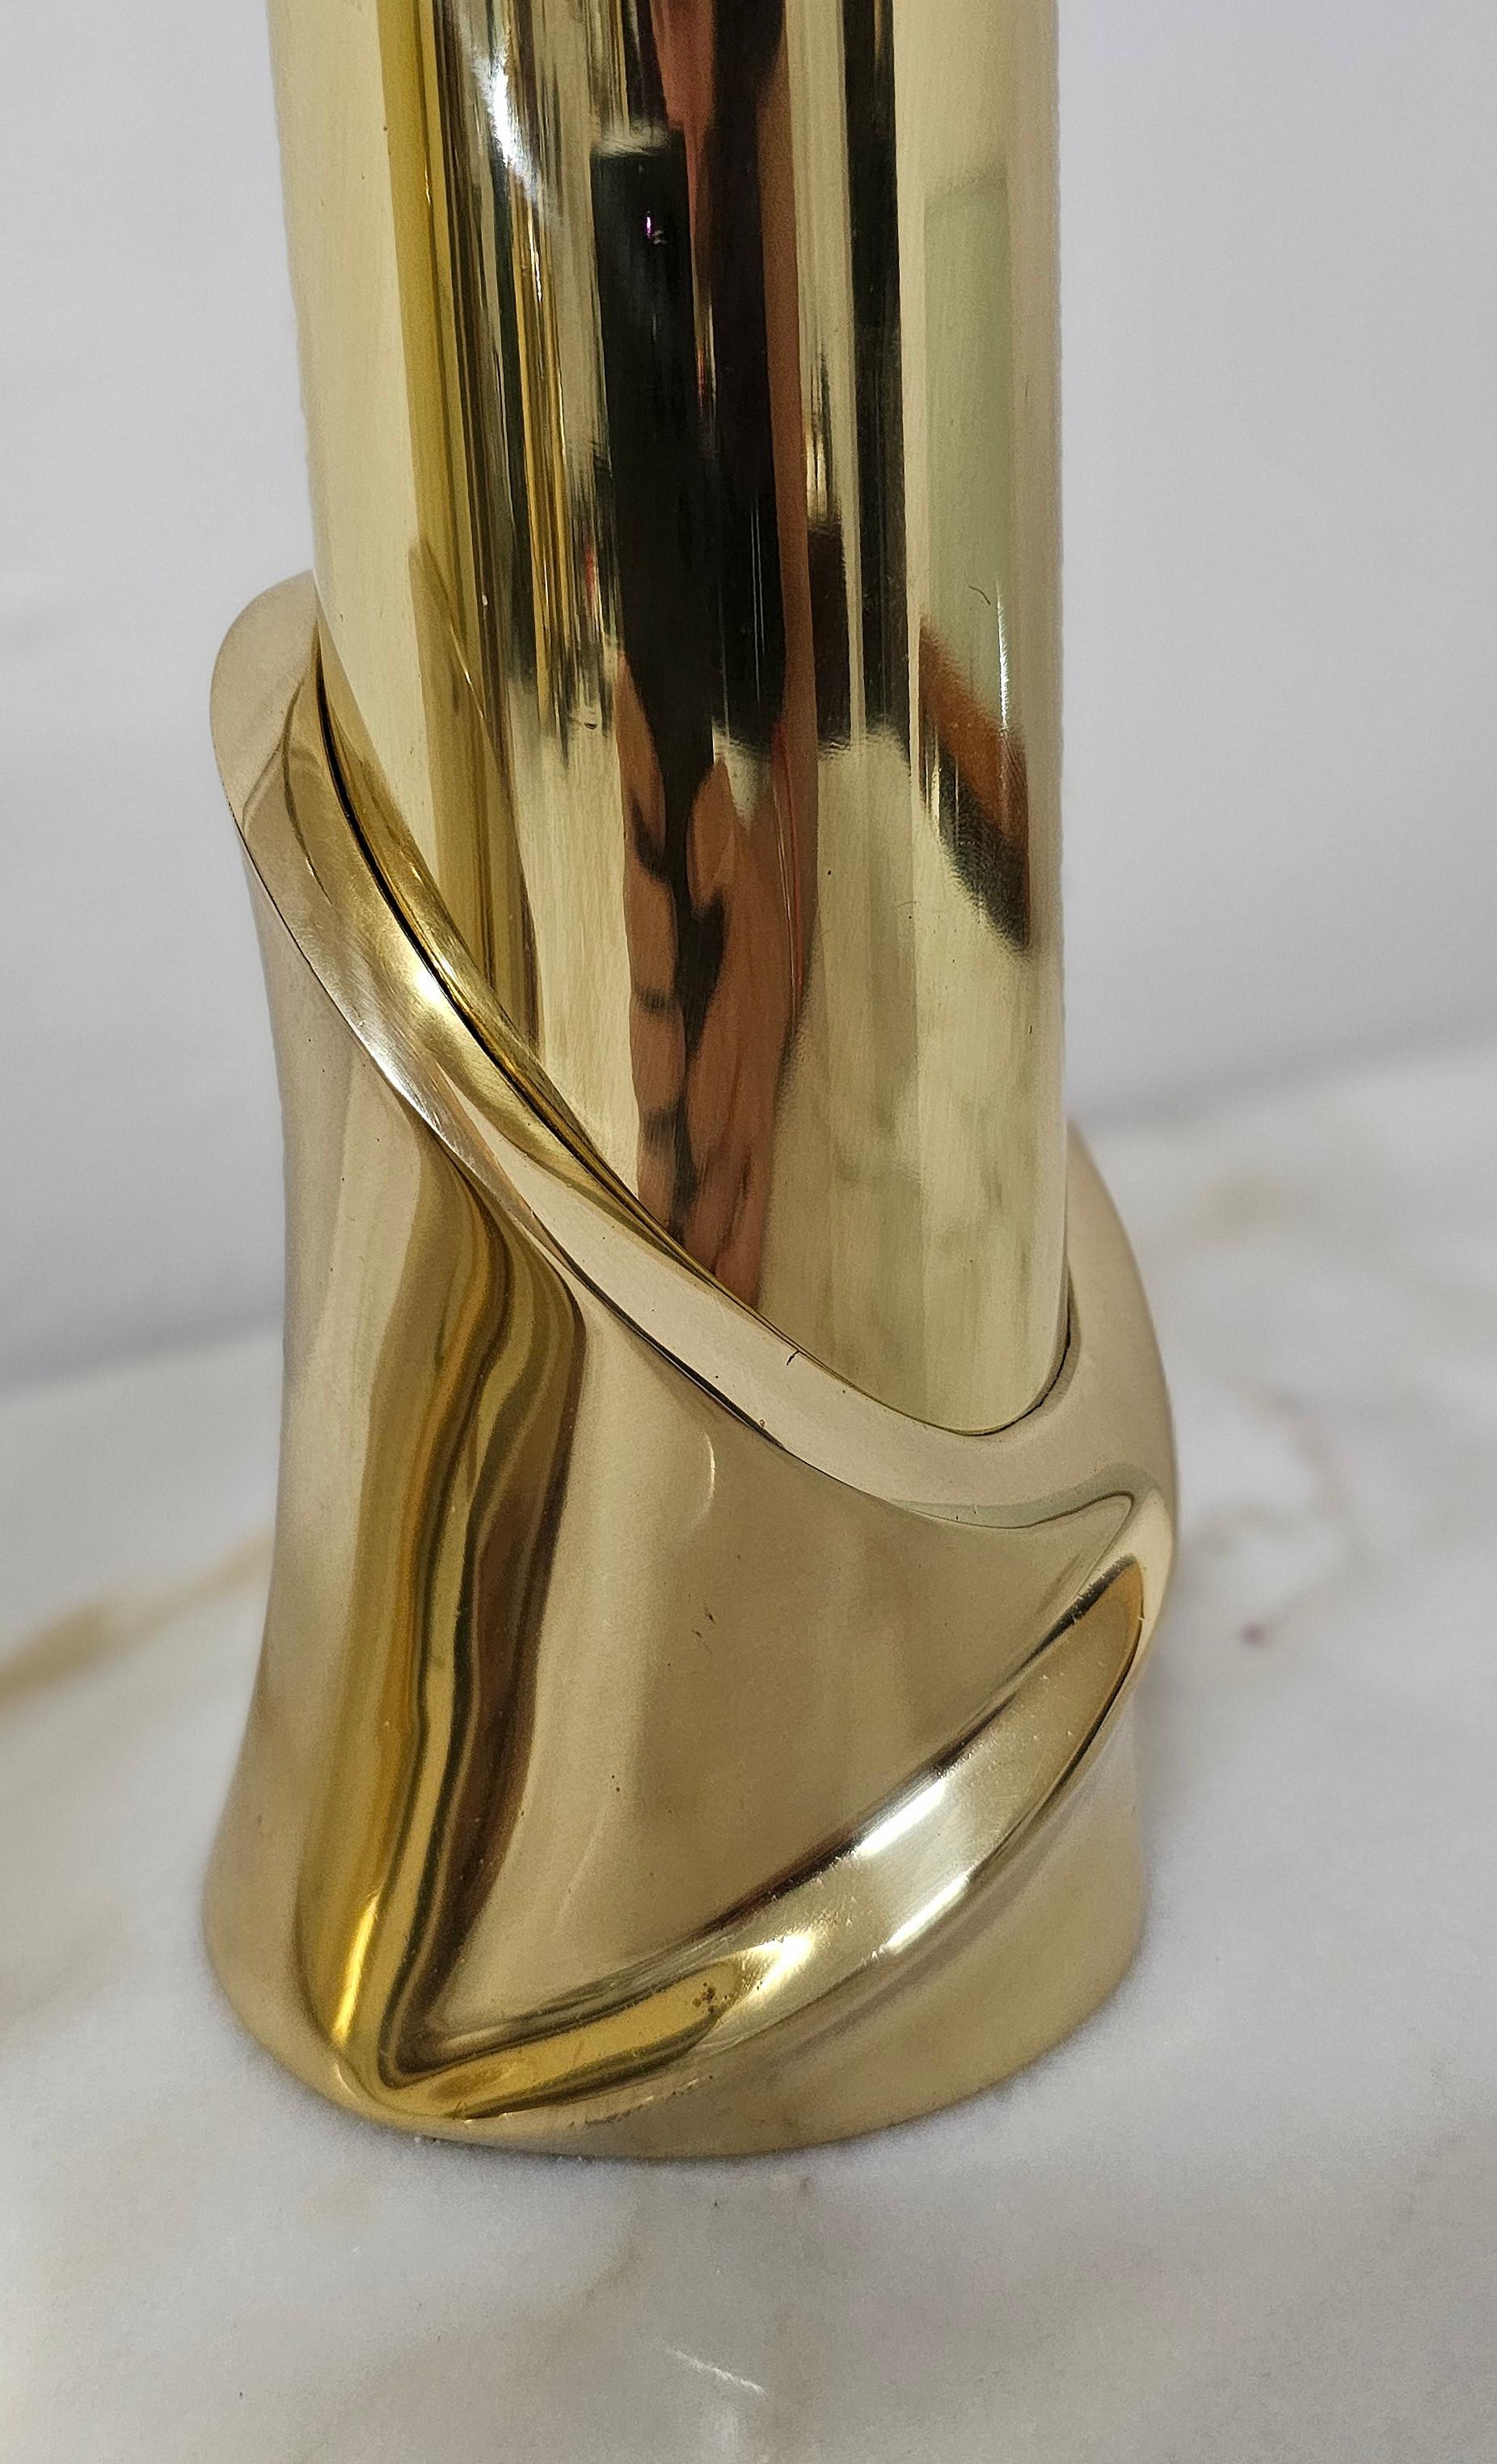 Pair of Table Lamps Bedside Lamps Brass Luciano Frigerio Italian Design 1970s  In Good Condition For Sale In Palermo, IT